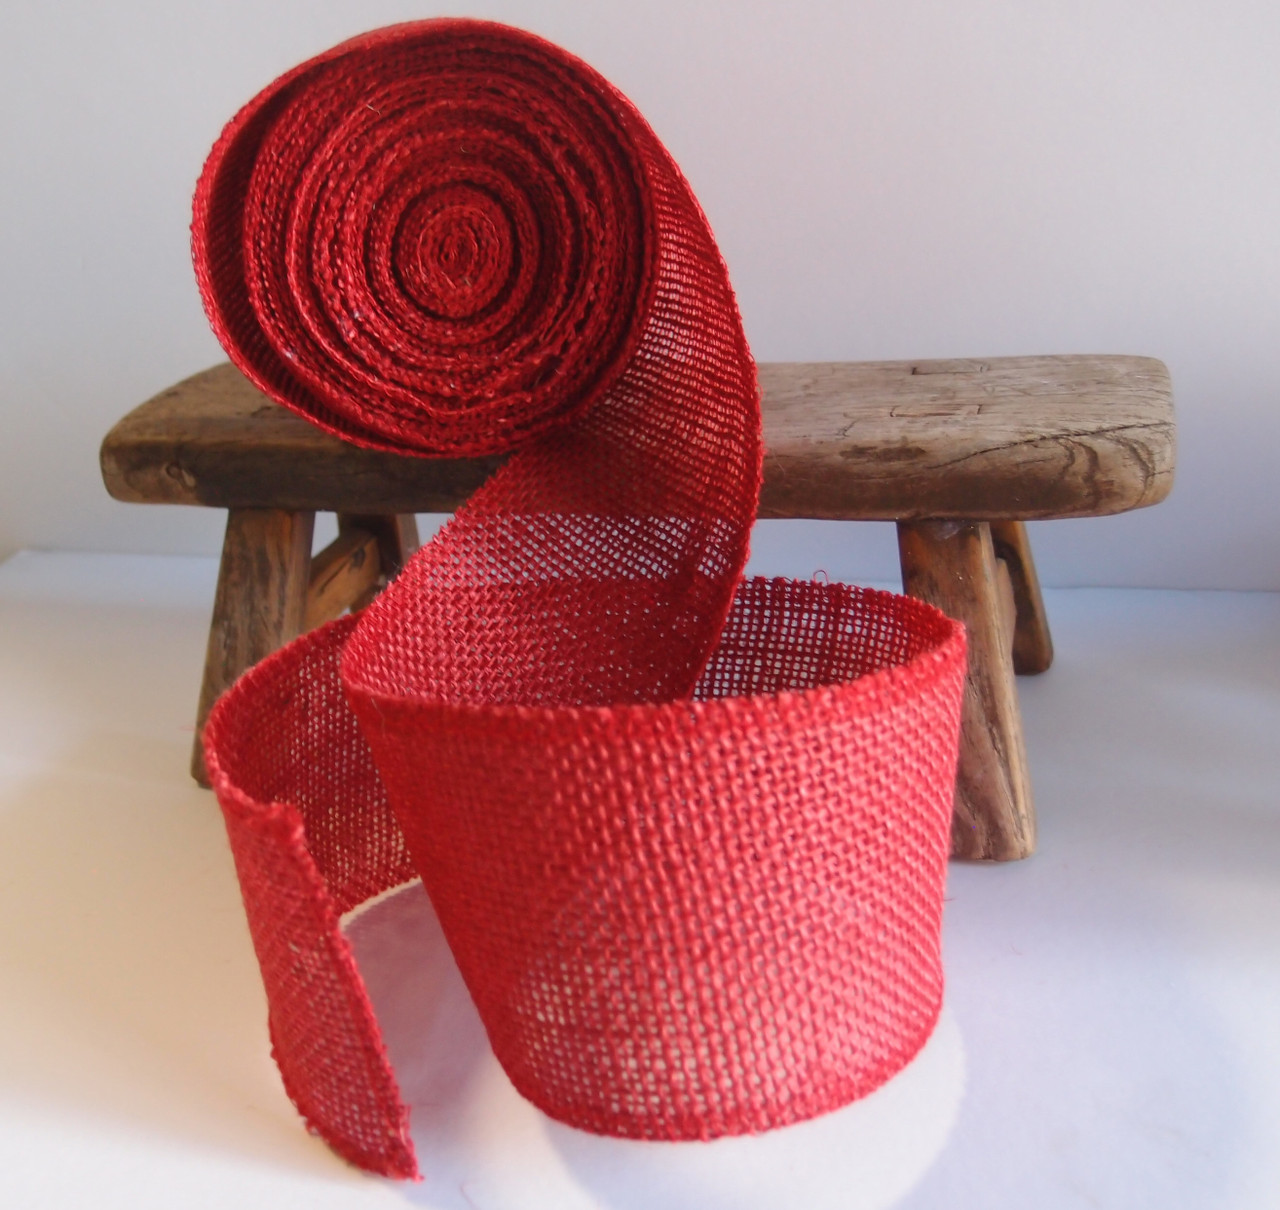 Red Burlap Ribbon 3 inch 2 Rolls 20 Yards Unwired Rustic Jute Ribbon for Crafts, Mason Jars, Weddings, Party Decoration; by Mandala Crafts